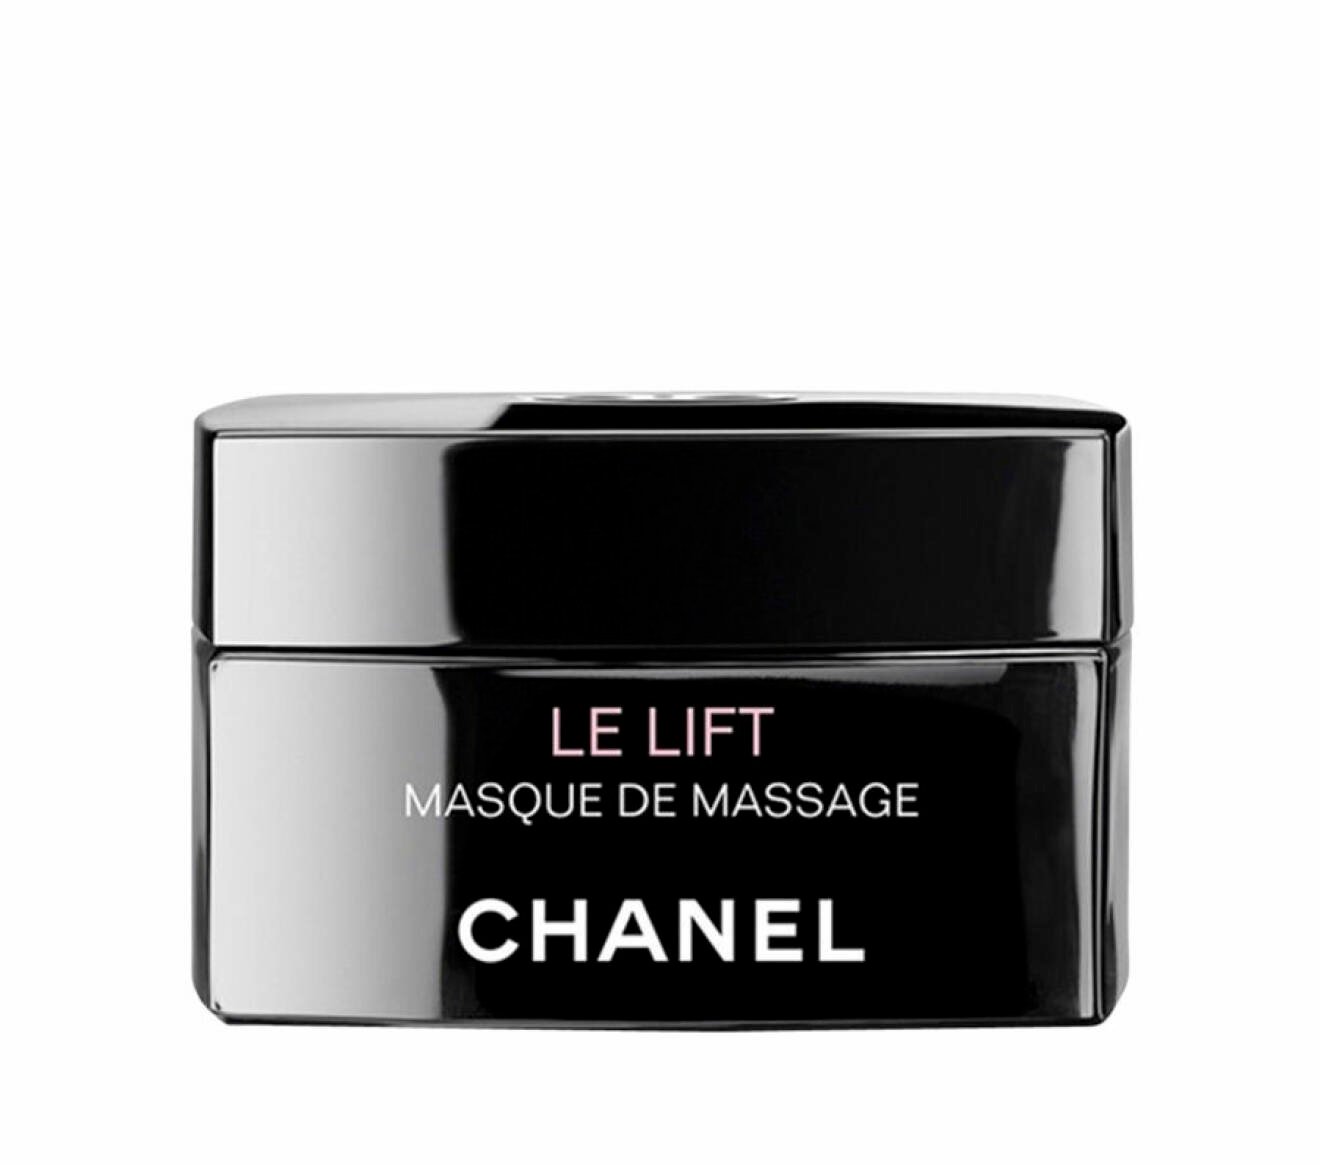 Le lift firming recontouring massage mask, 870 kr, Chanel.